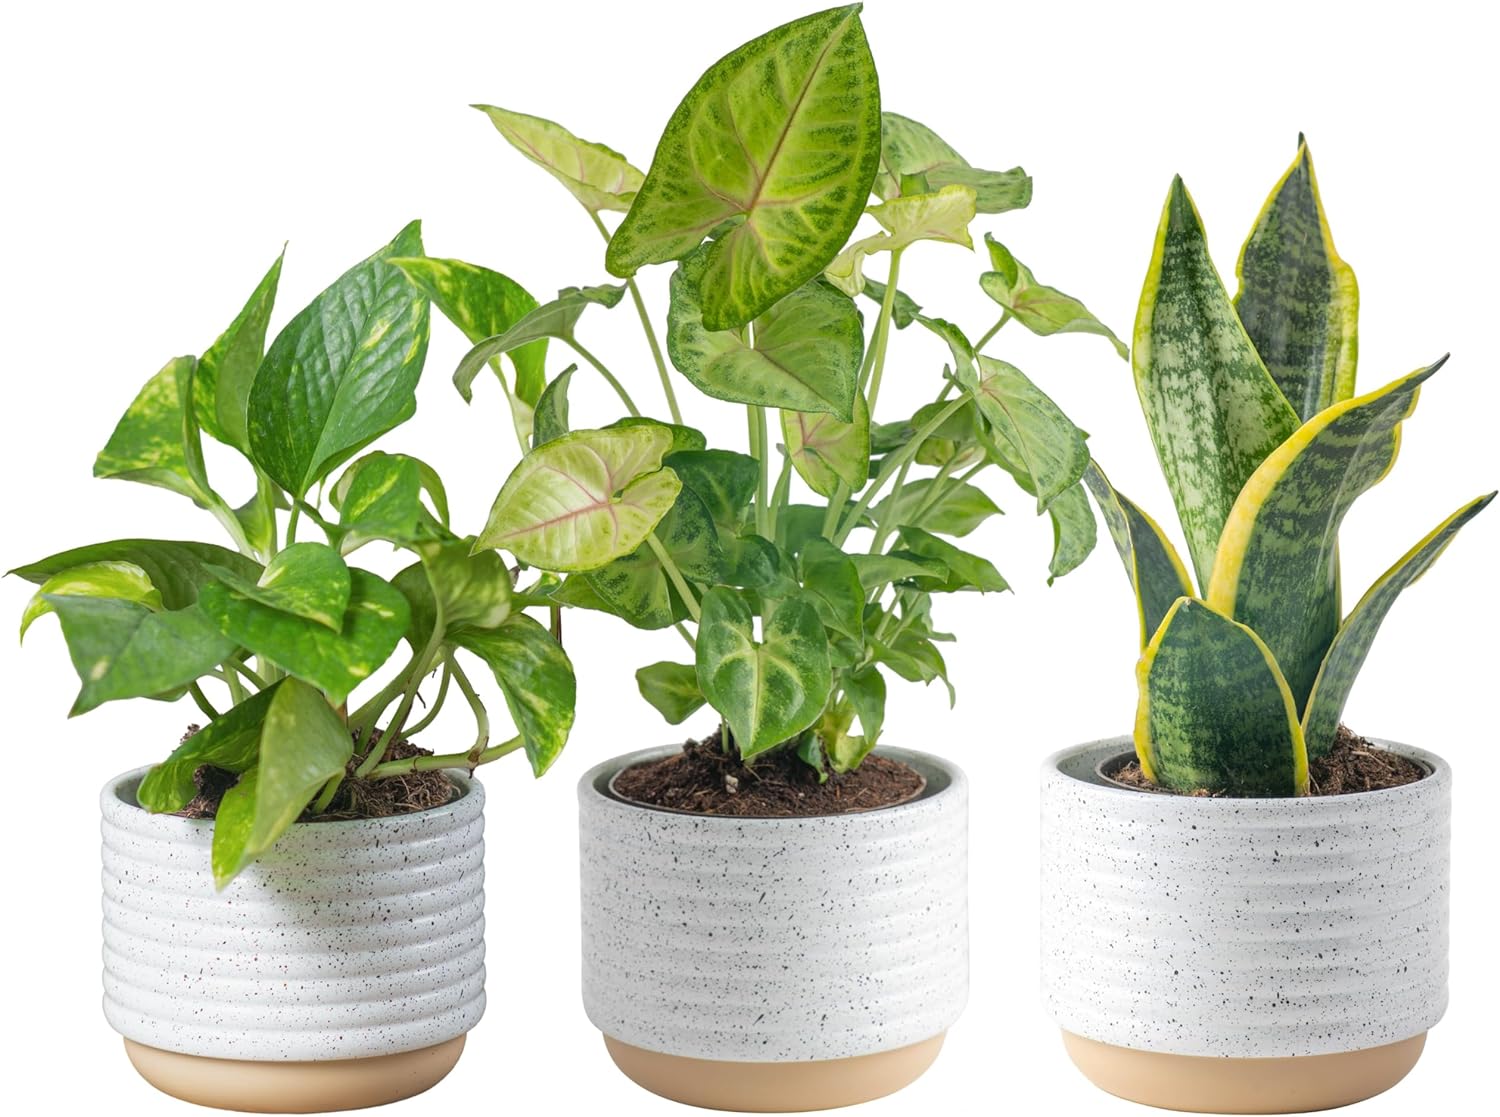 Indoor plants improve air quality of the home